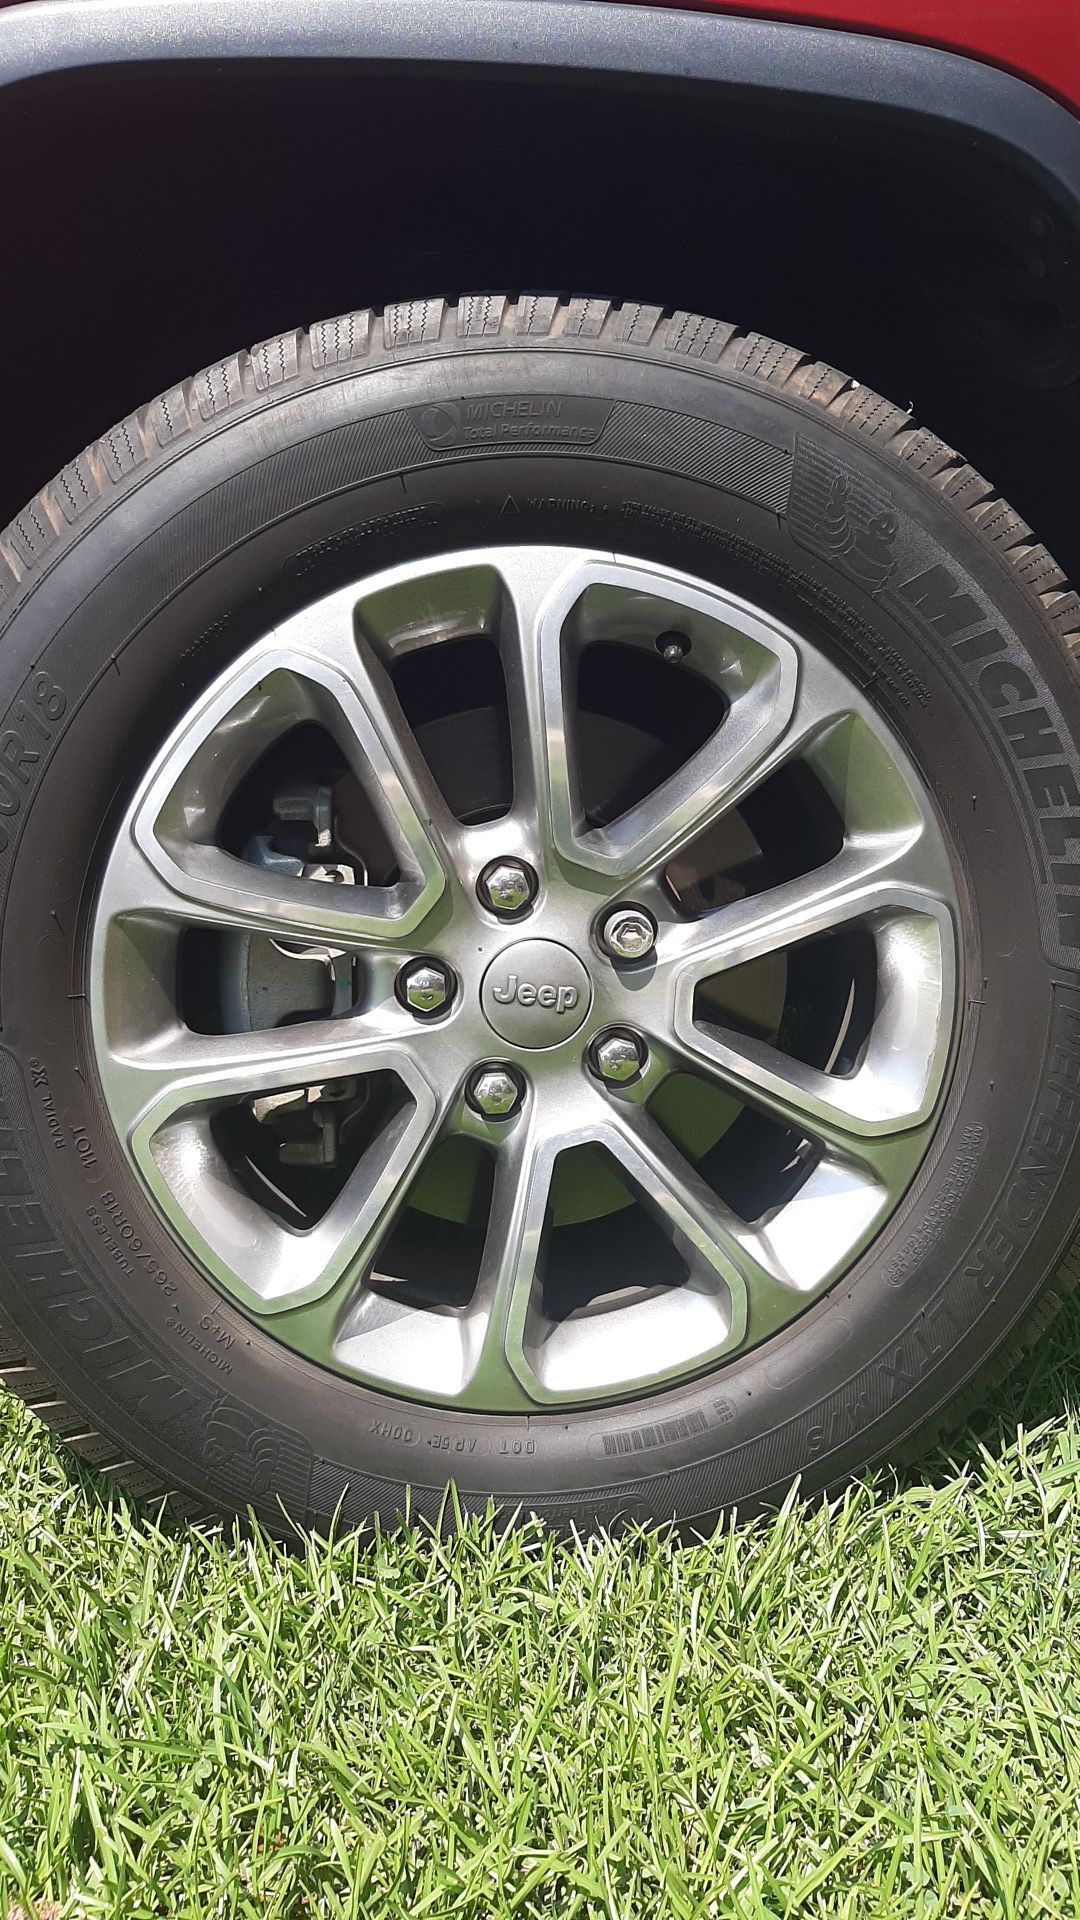 Jeep Grand Cherokee rims and tires